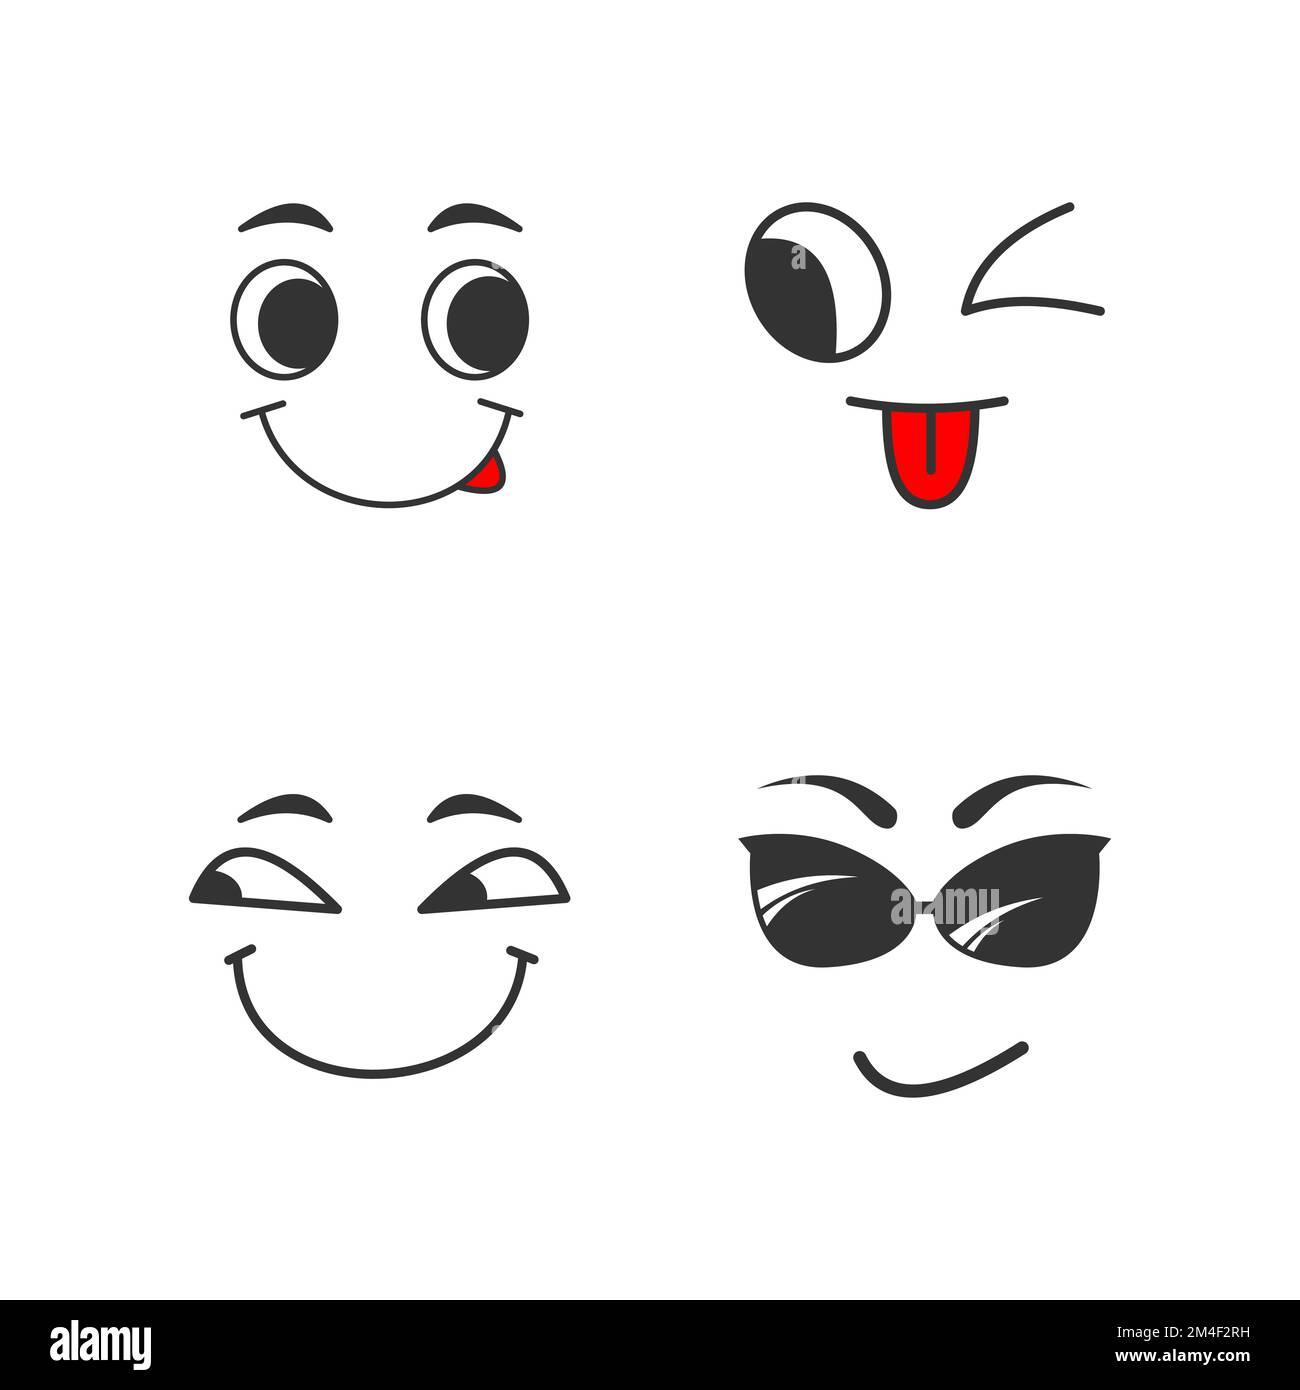 face in smiling sweetly Image graphic icon logo design abstract concept vector stock. Can be used as a symbol associated with icon or funny Stock Vector